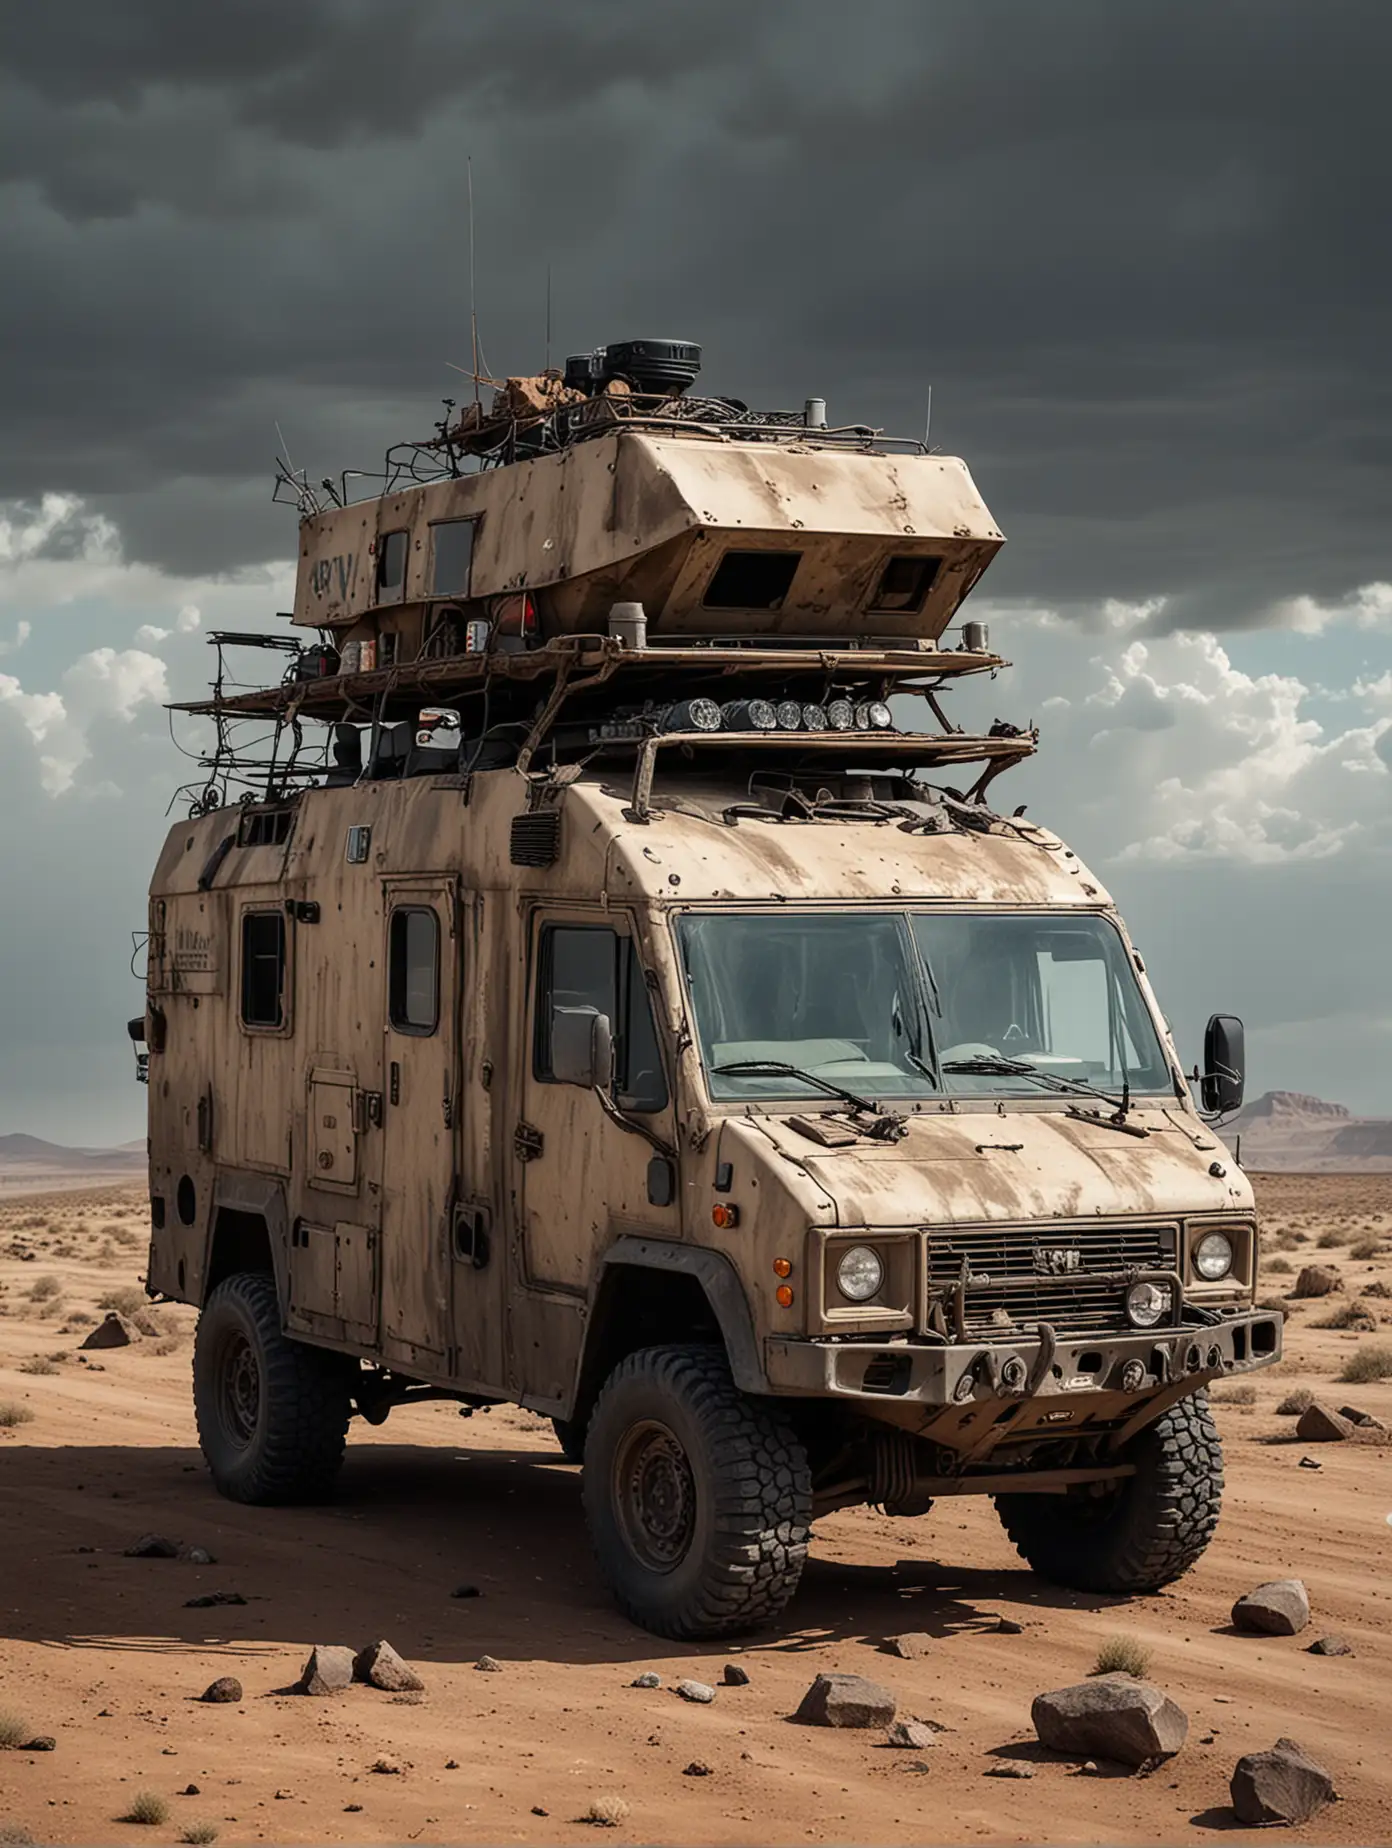 PostApocalyptic-Survival-RV-with-Reinforced-Steel-Plates-and-Weapons